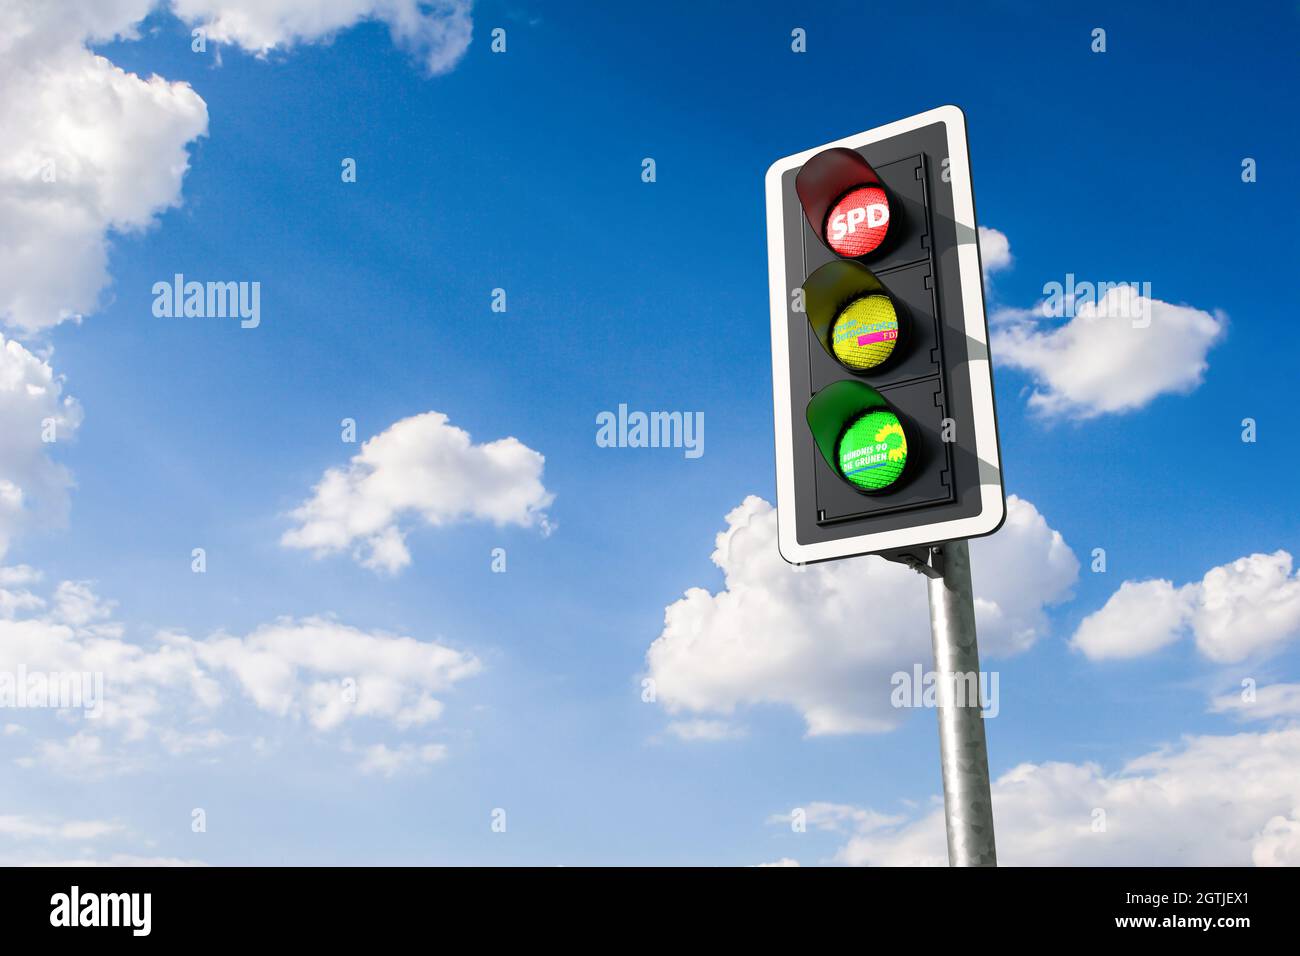 Ampelkoalition (traffic light coalition) concept. The German parties SPD, FDP and Die Gruenen cacn build a so called traffic light coalition derived f Stock Photo